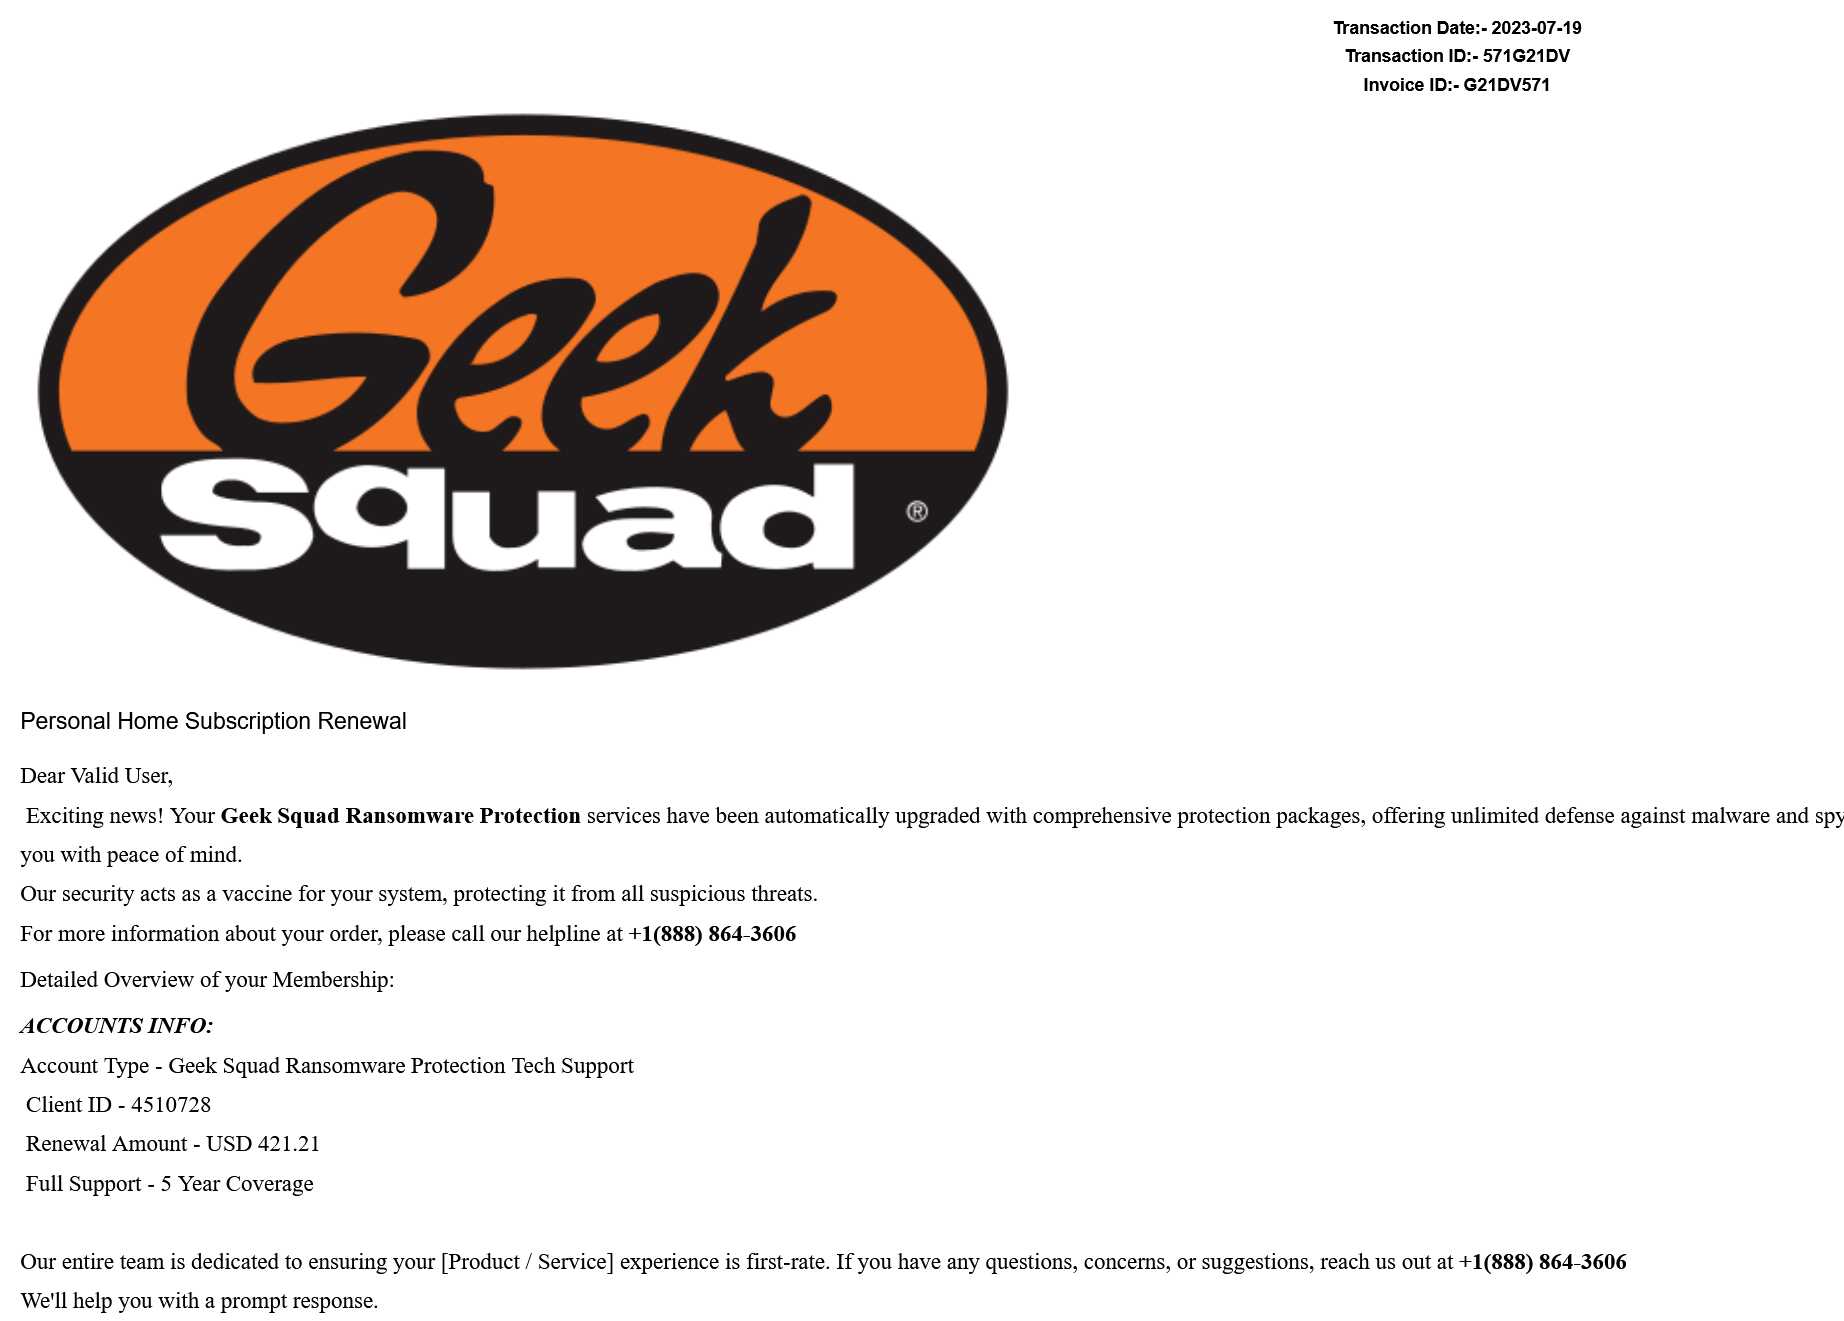 Best Buy introduces Geek Squad Business Membership across Canada